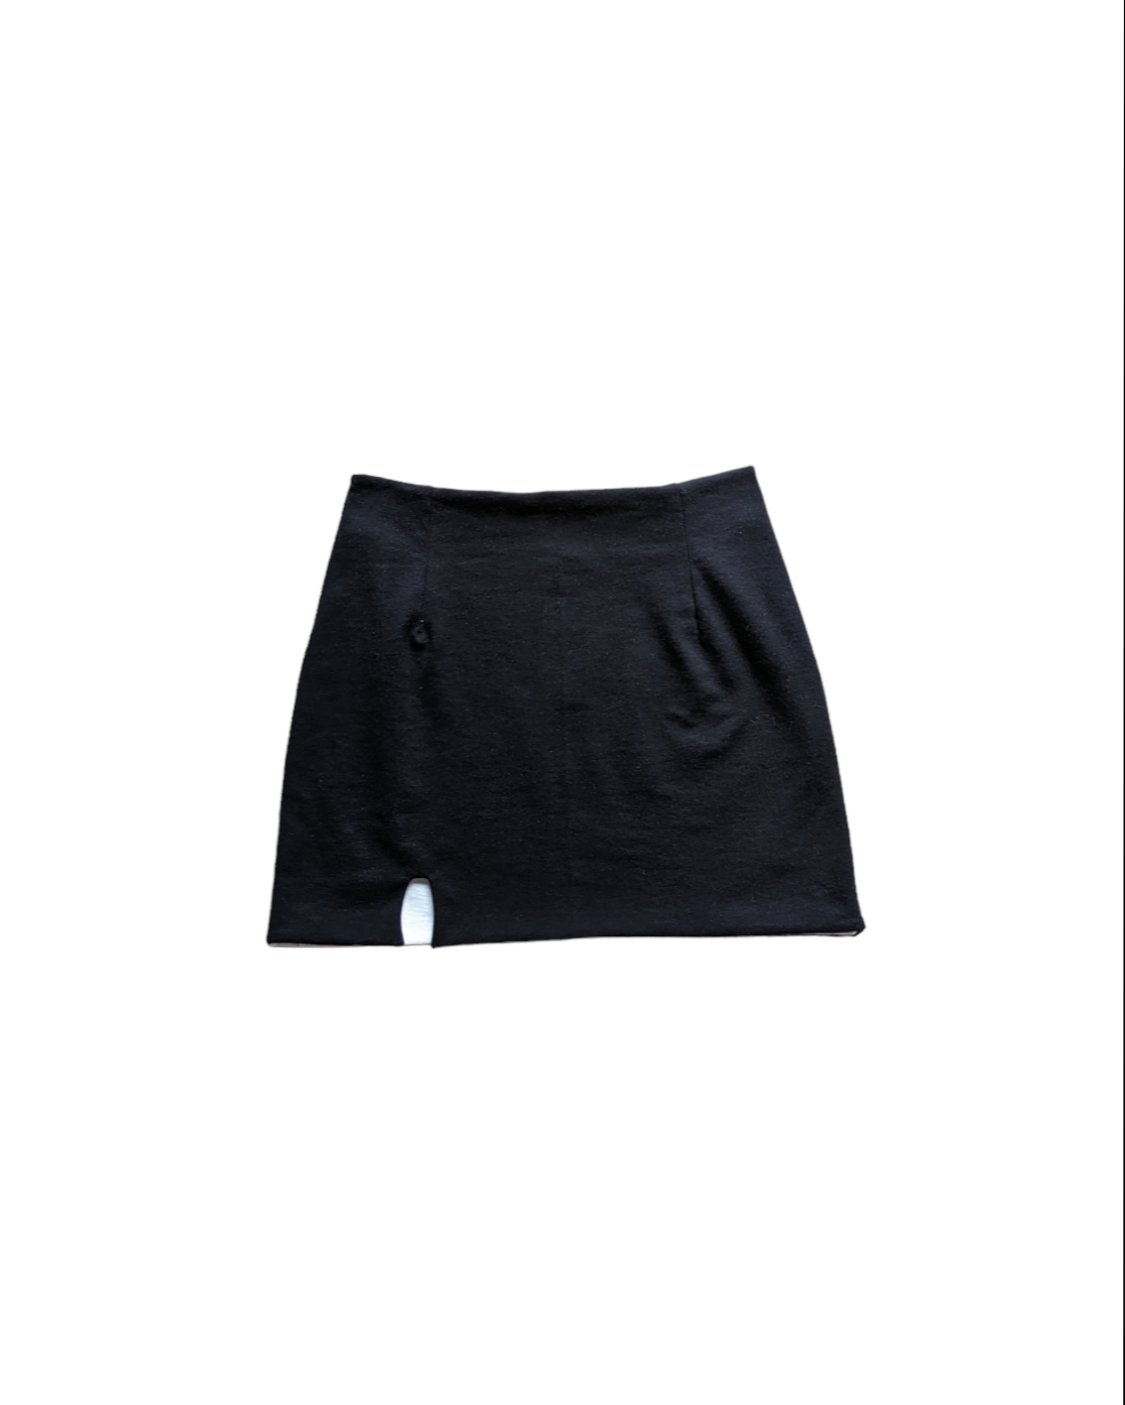 Image of CATCALL: THE REVERSIBLE MINI SKIRT in CHERRY